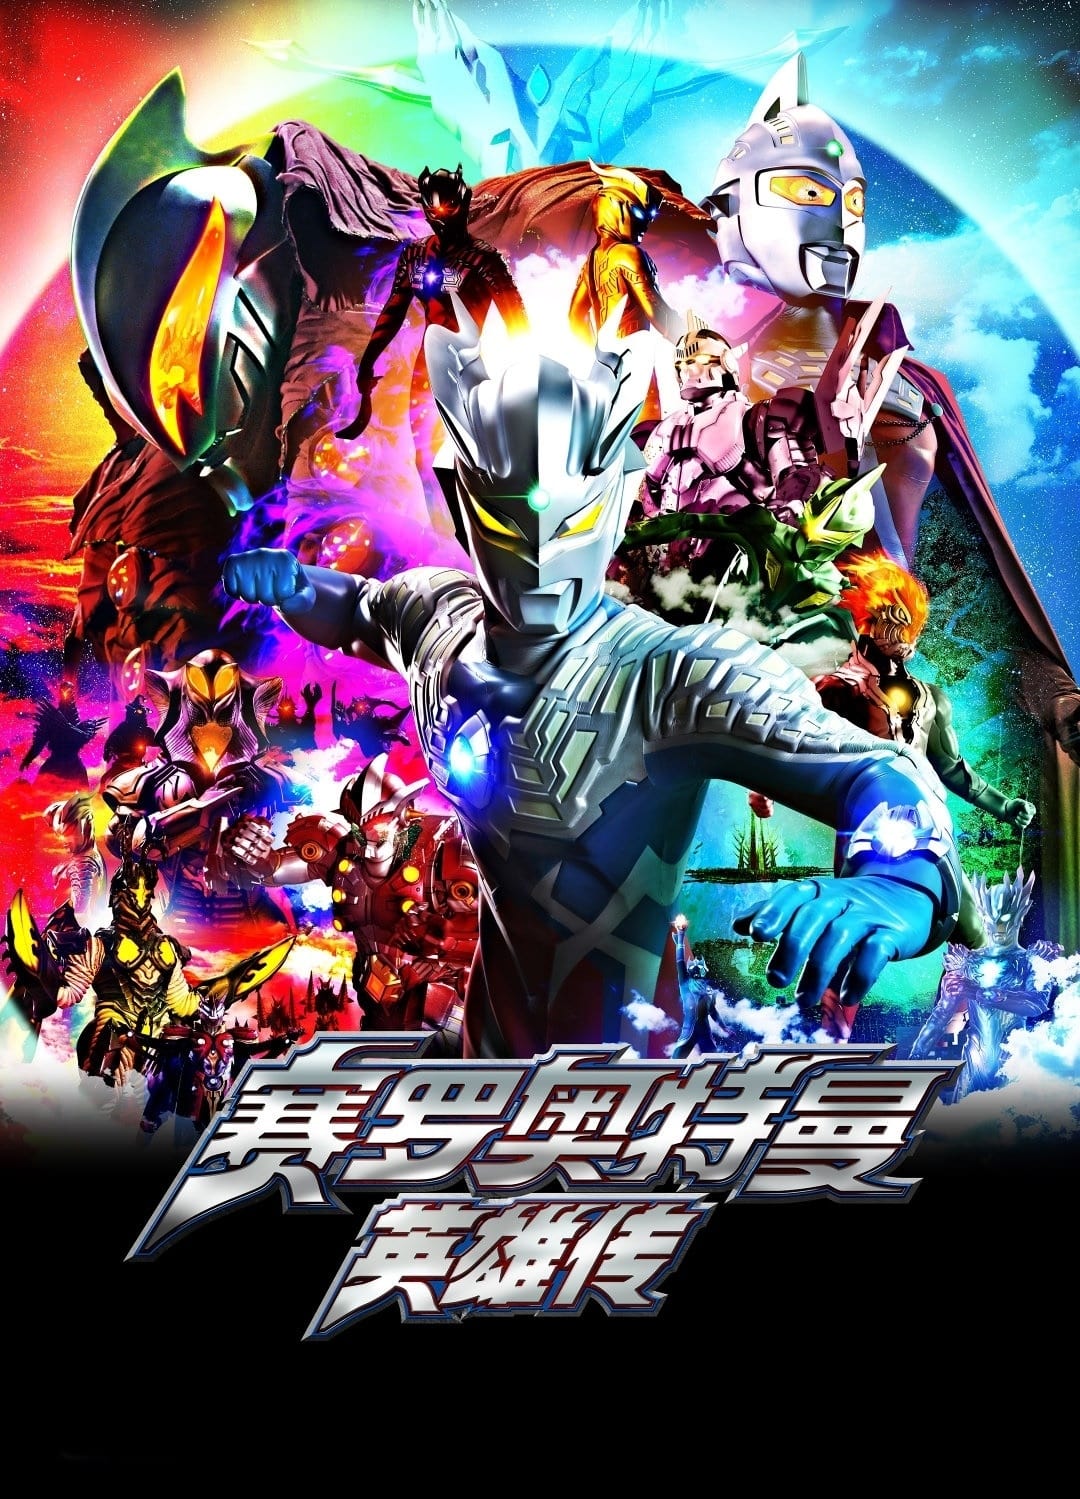 Ultraman Zero: The Chronicle TV Shows About Giant Monster